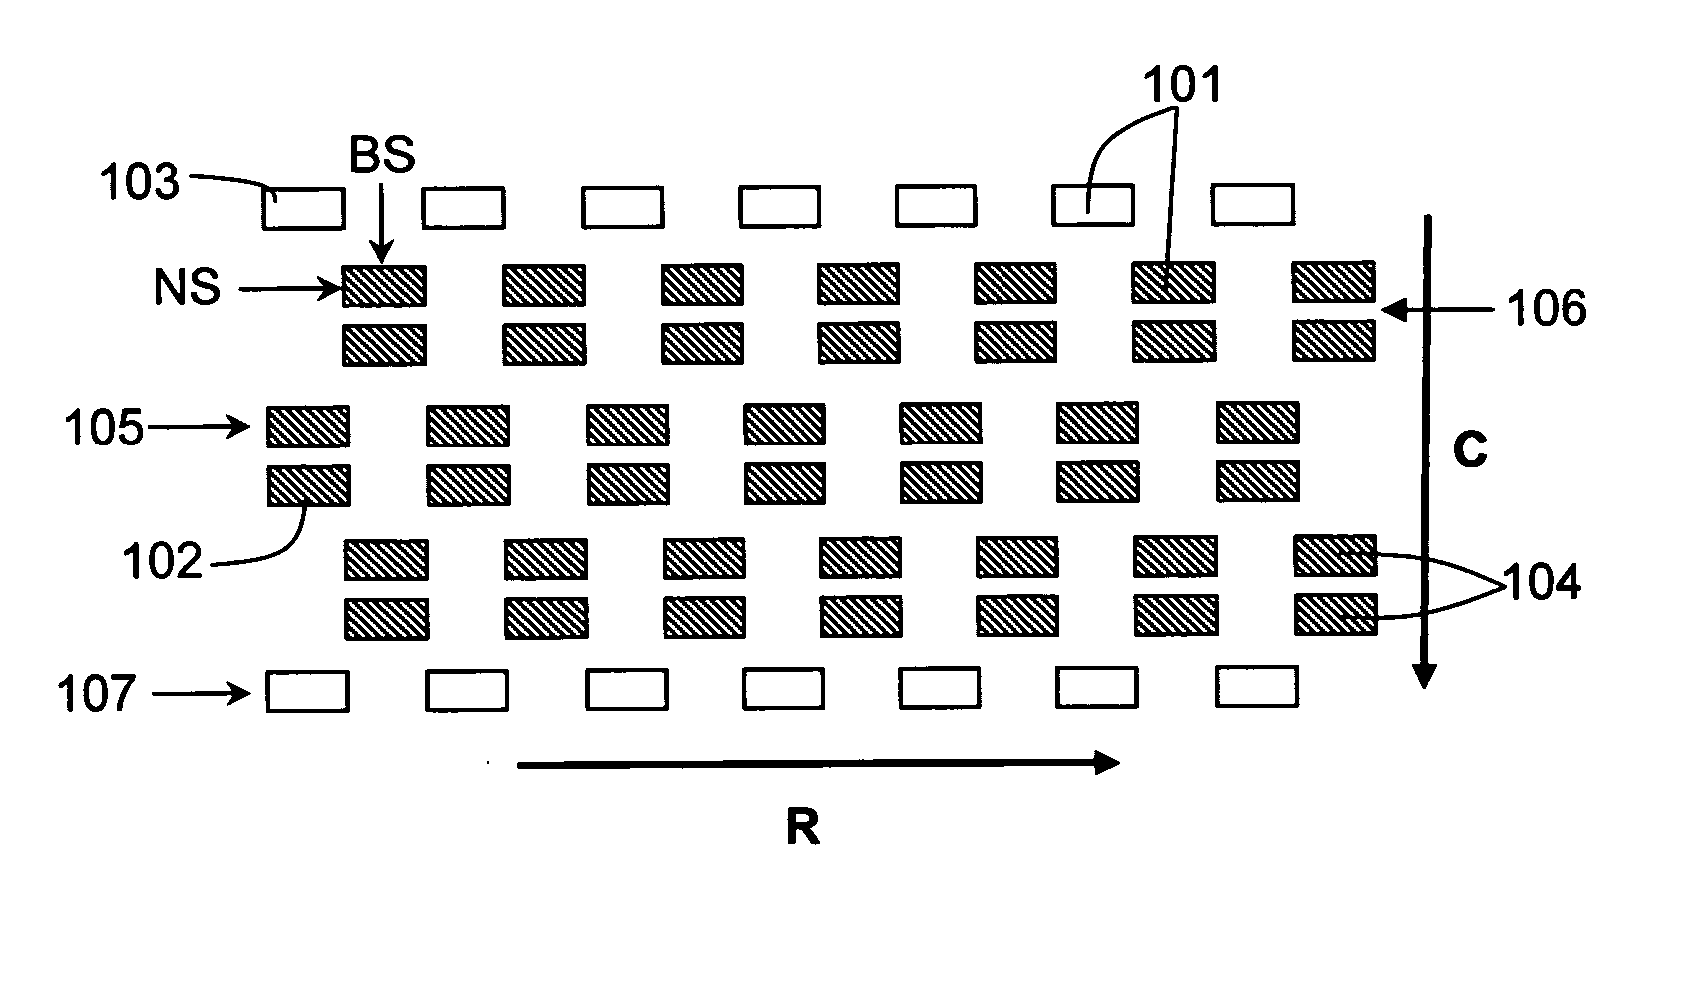 Array connector having improved electrical characteristics and increased signal pins with decreased ground pins